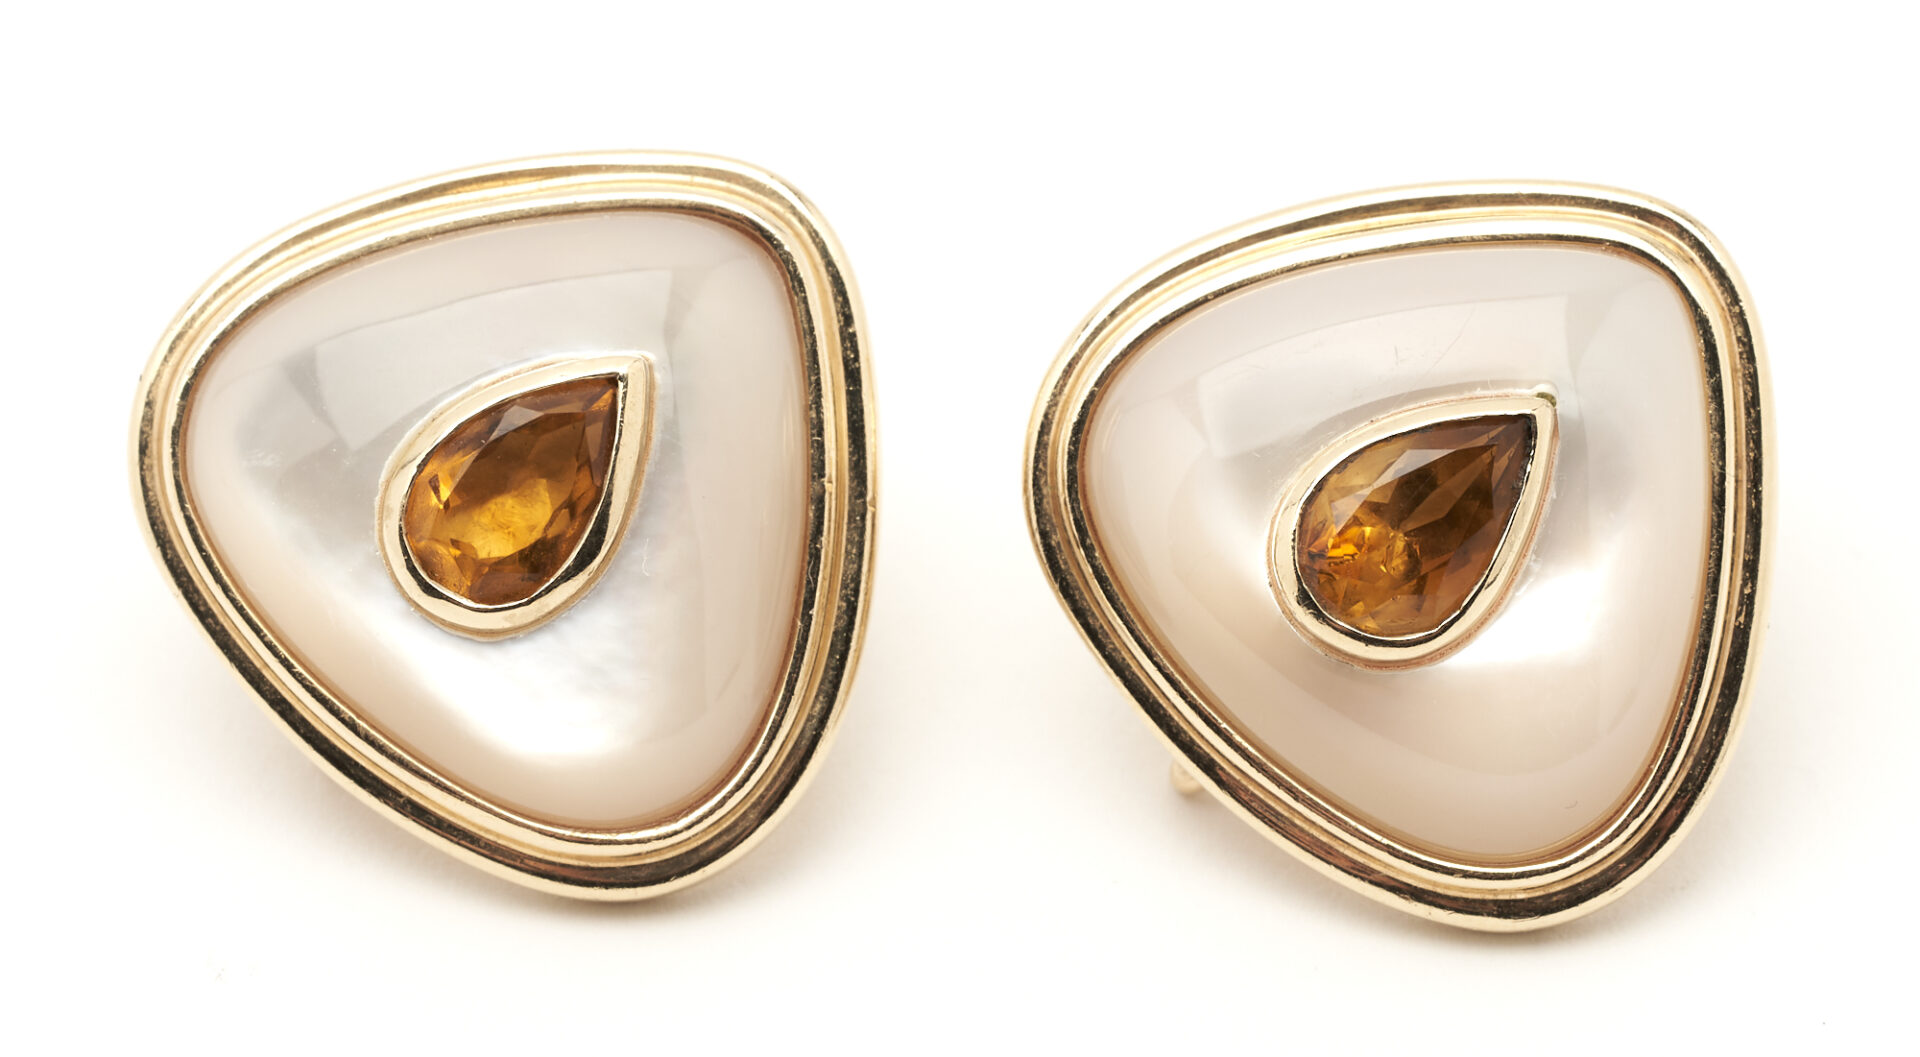 Lot 667: 2 Pairs of Ladies' Yellow Gold Earrings